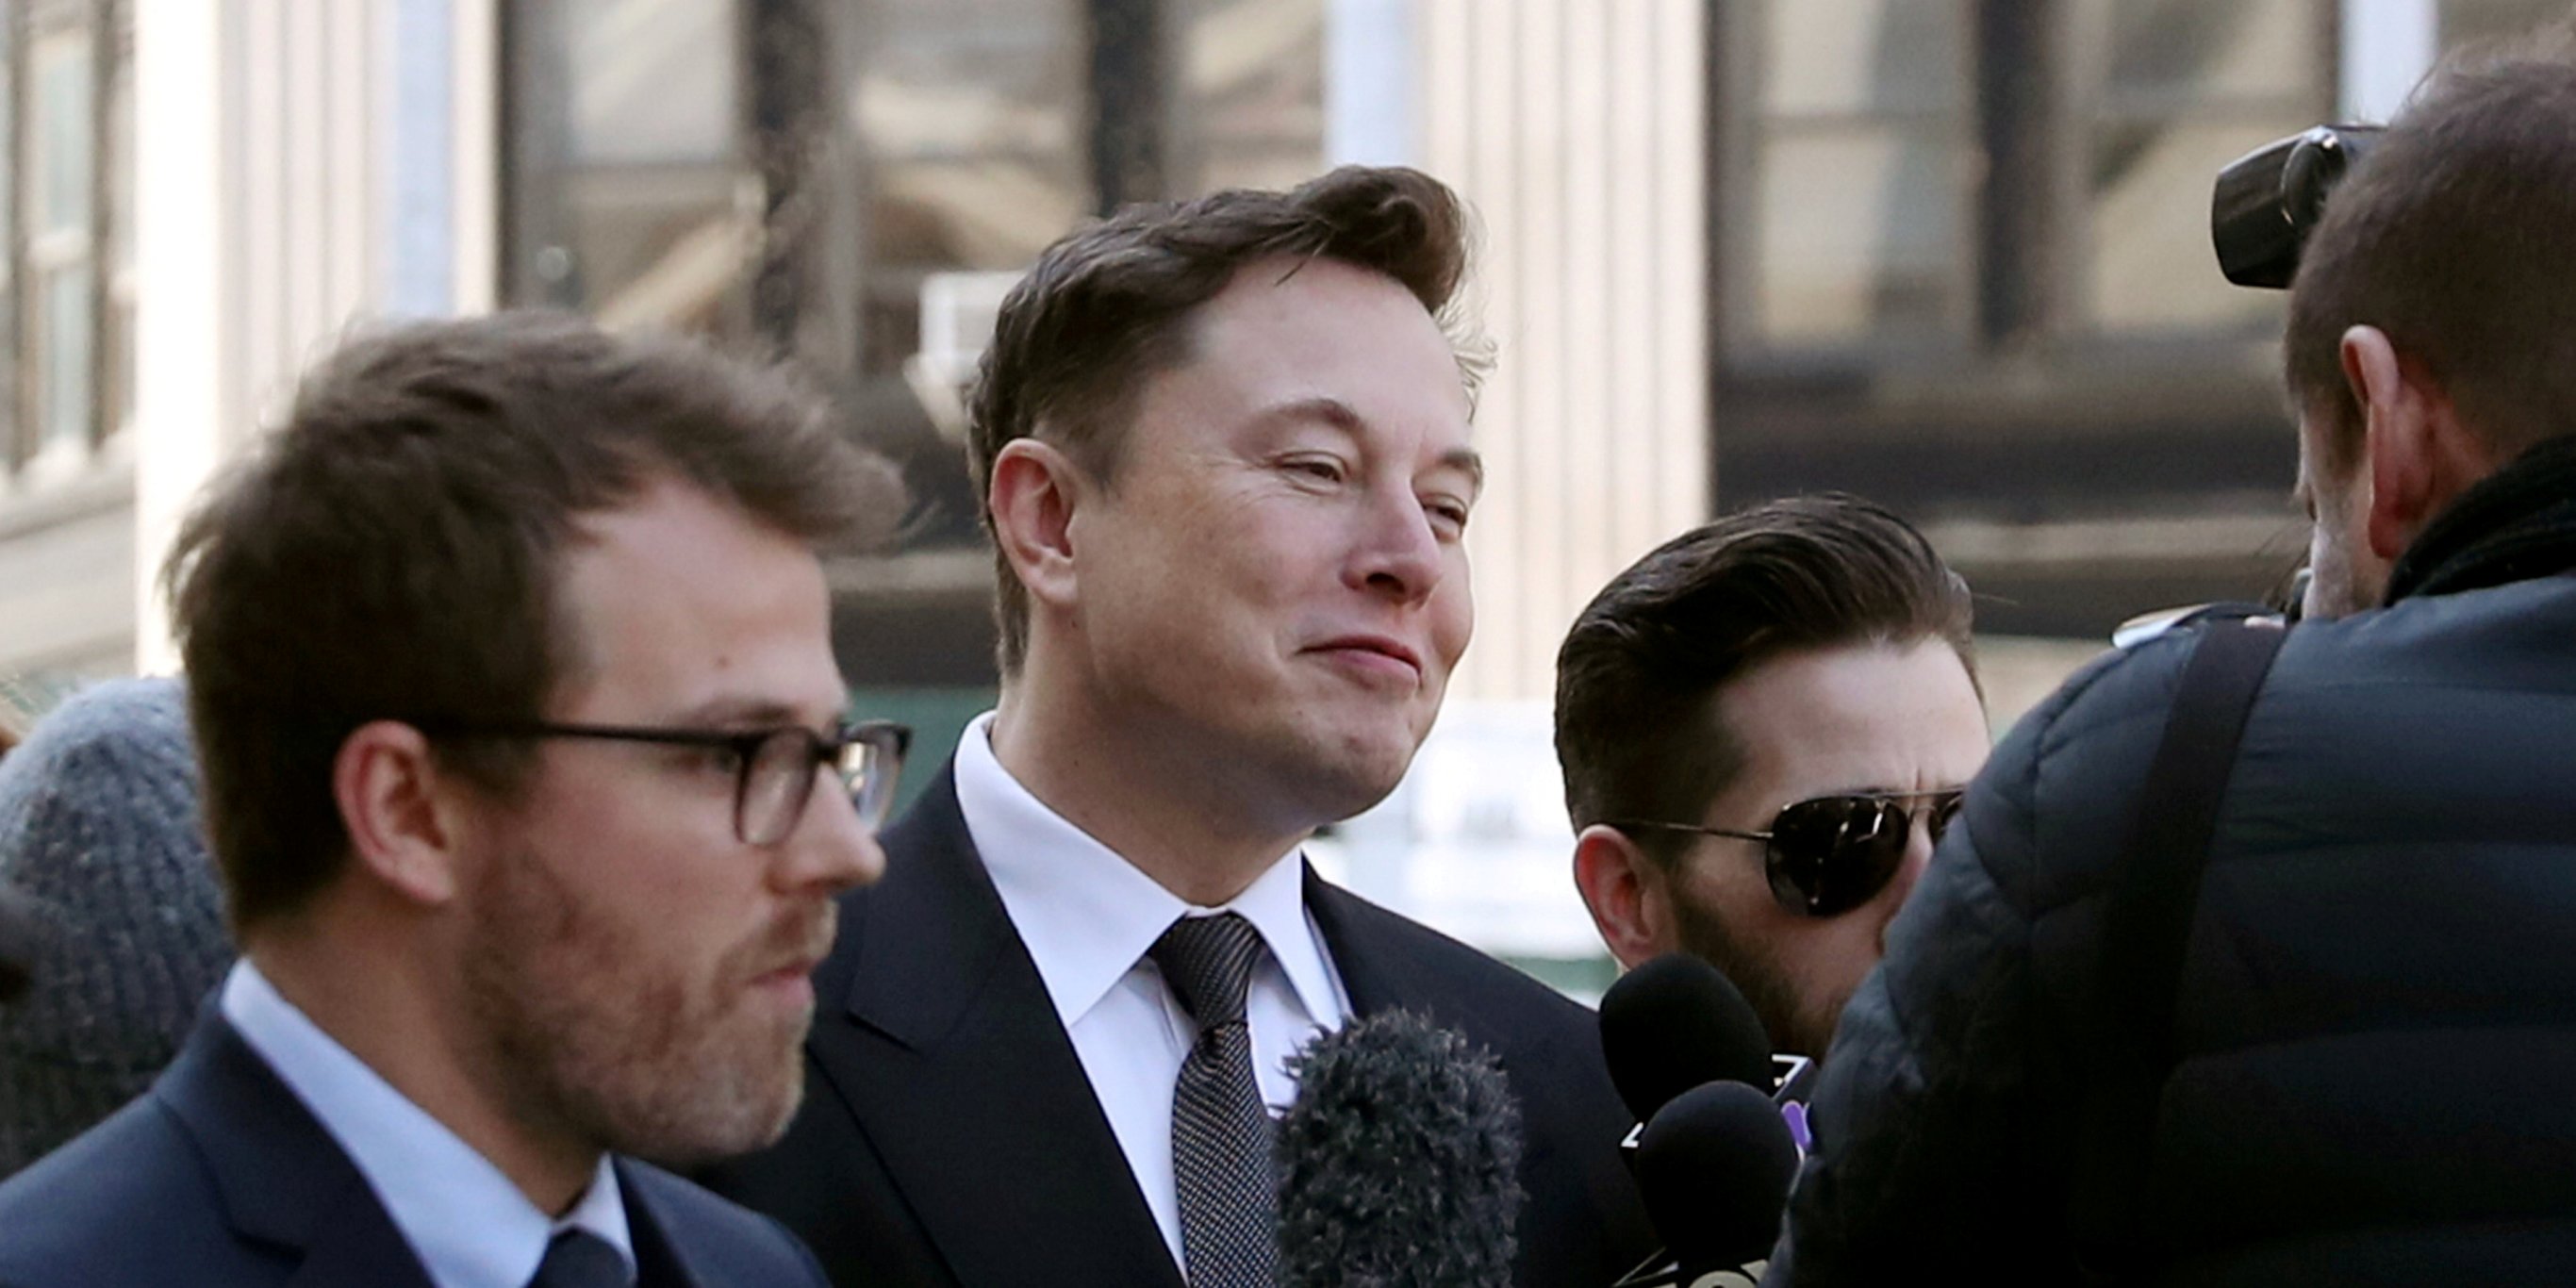 ‘I will nuke you’: Elon Musk was accused of shoving and threatening a former Tesla employee — but the company’s board says there was no physical altercation (TSLA)